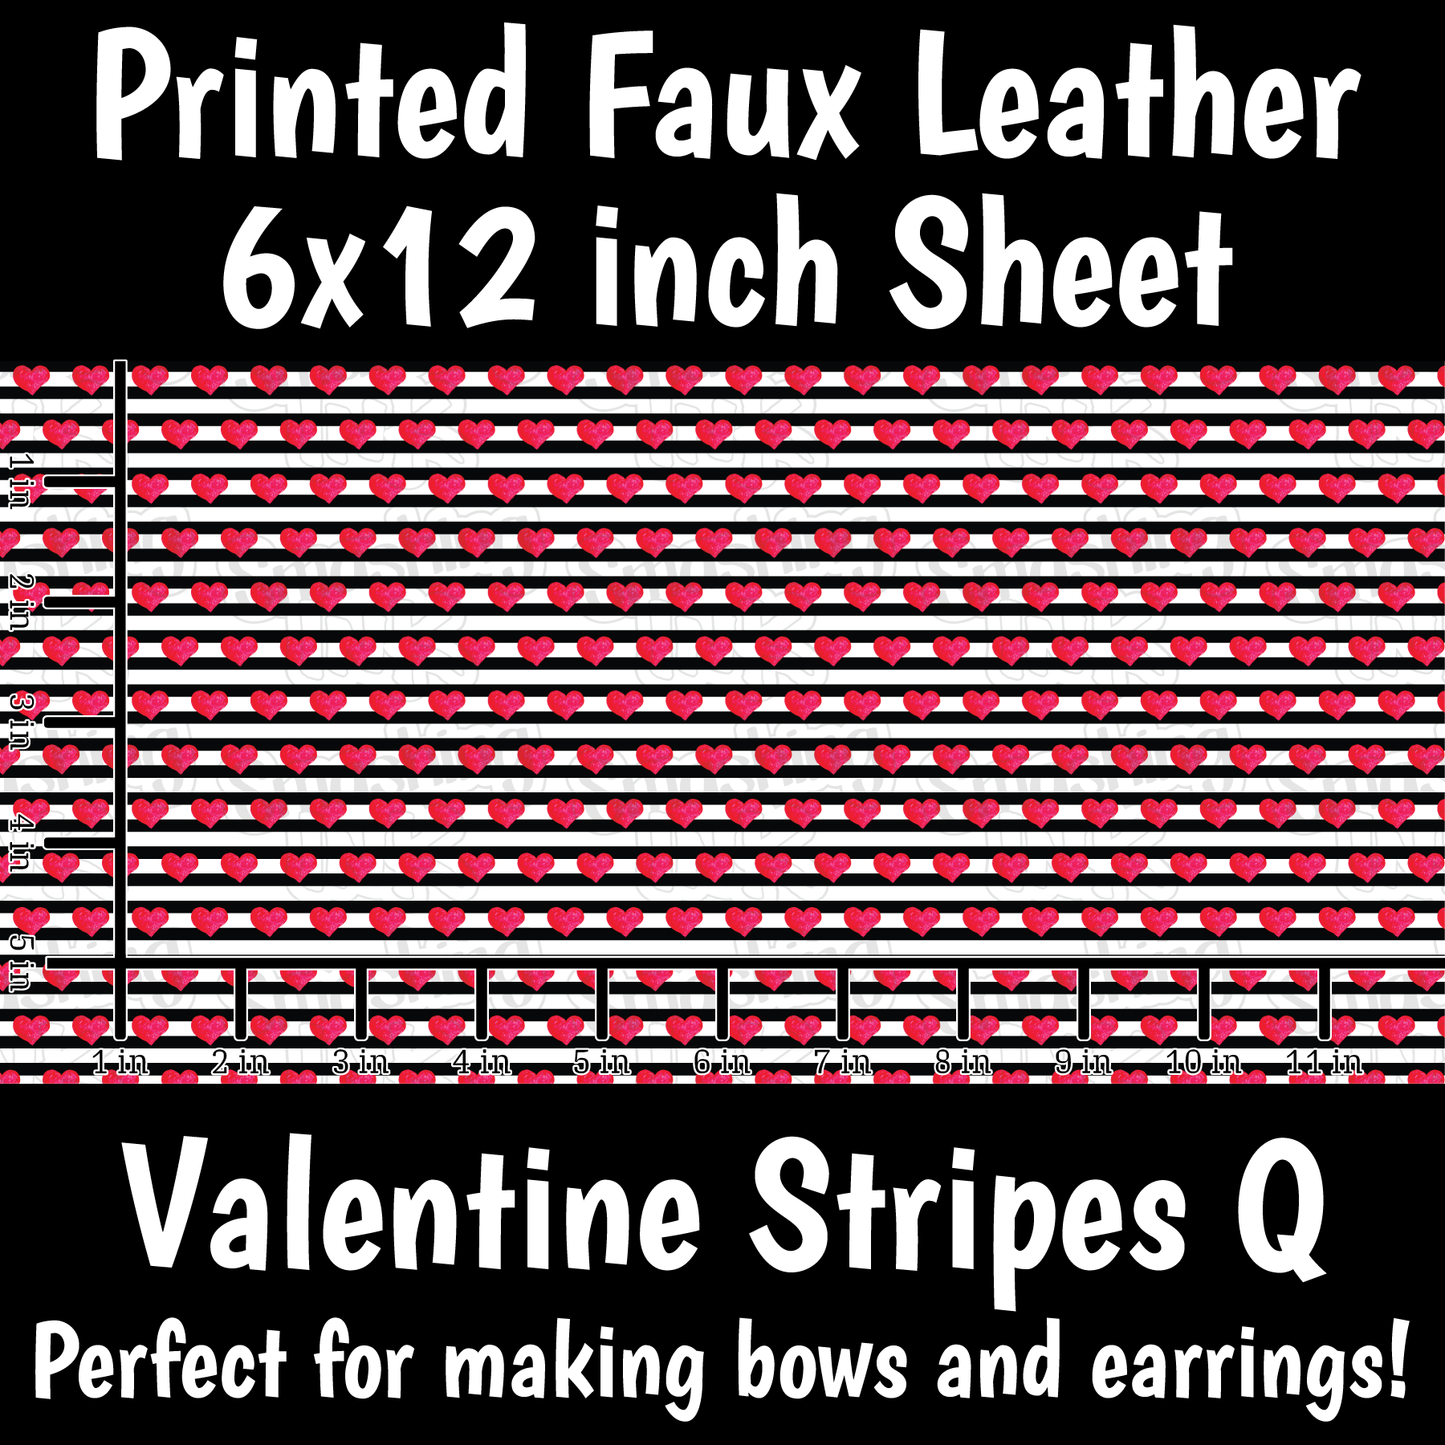 Valentine Stripes Q - Faux Leather Sheet (SHIPS IN 3 BUS DAYS)